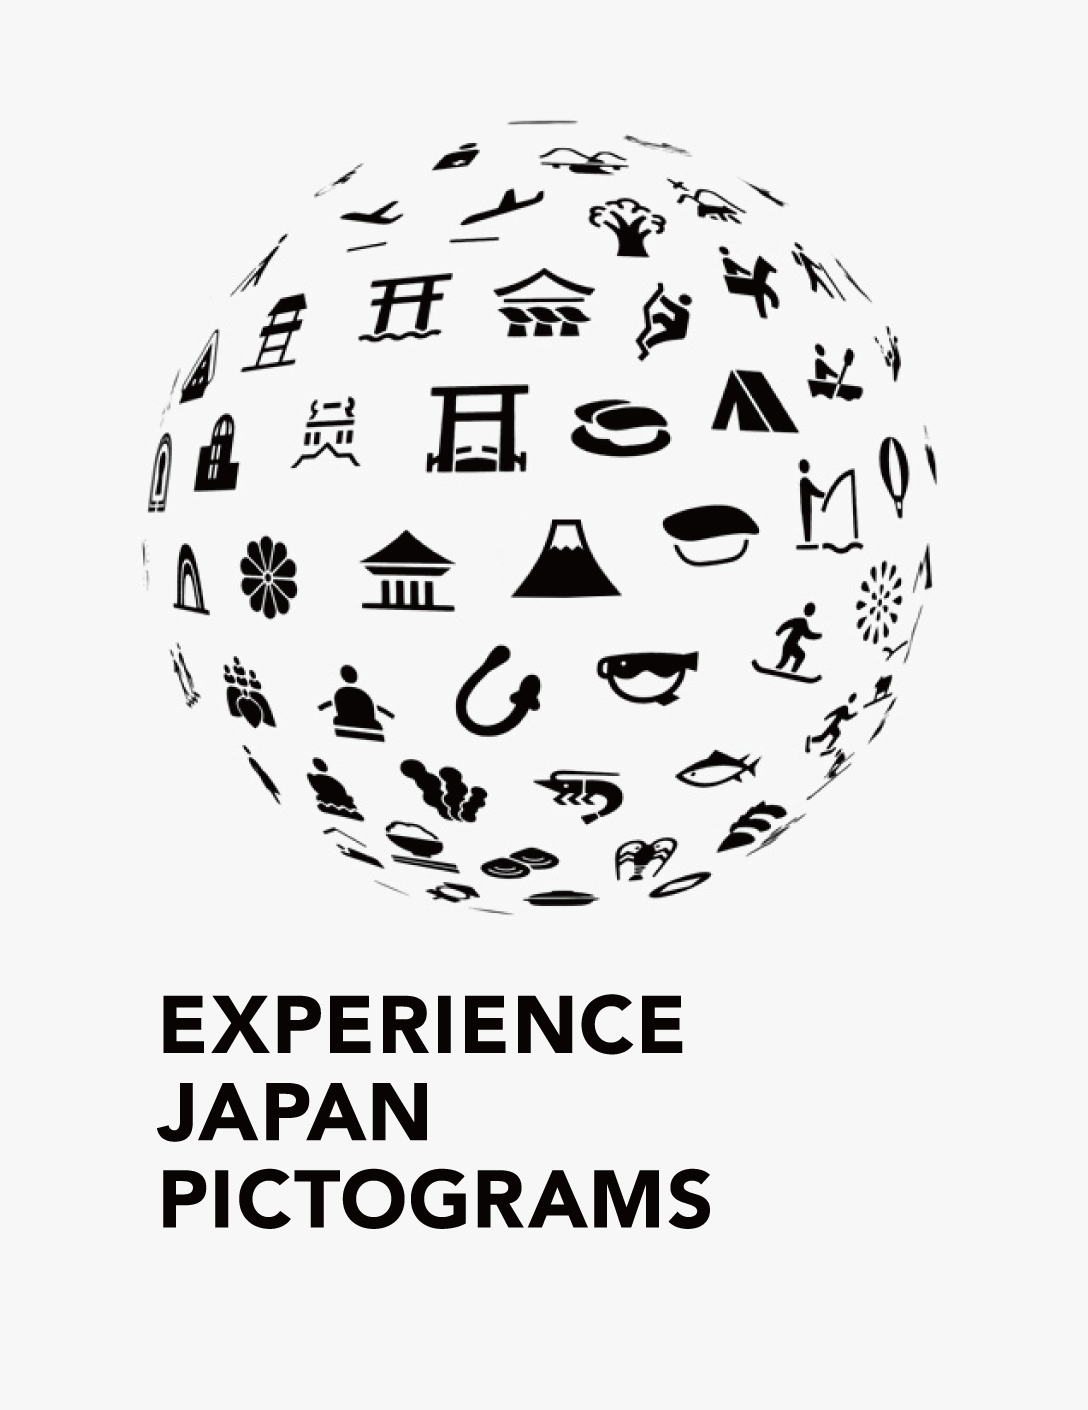 EXPERIENCE JAPAN PICTOGRAMS